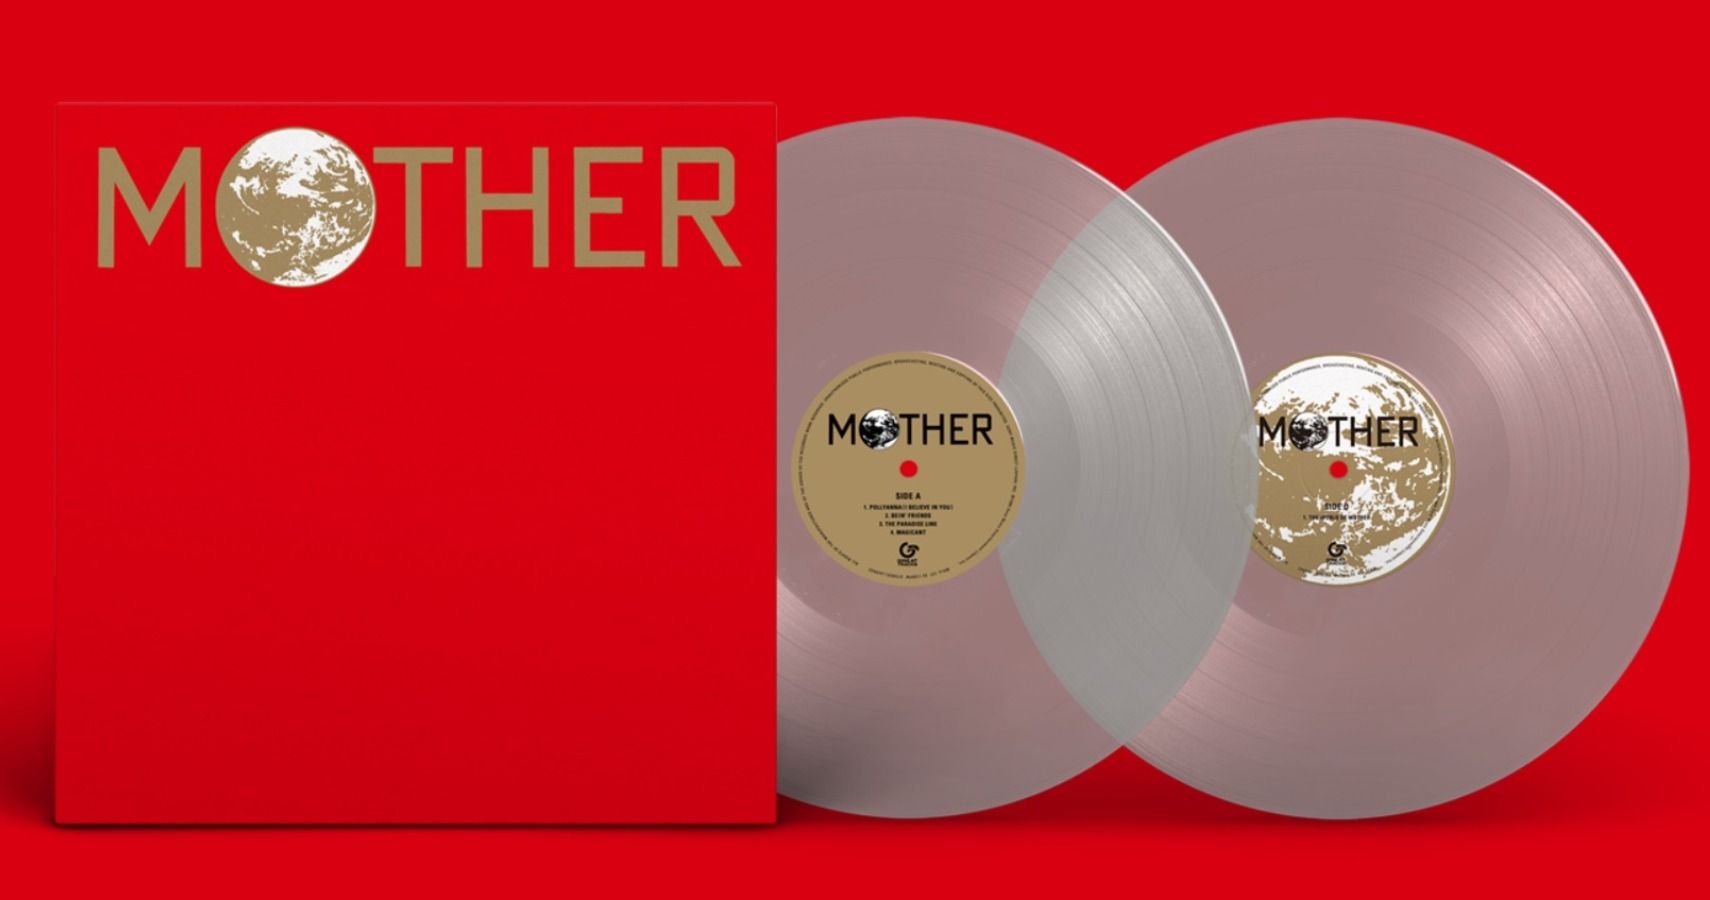 Sony Music Is Releasing The MOTHER Soundtrack On Vinyl In Japan For